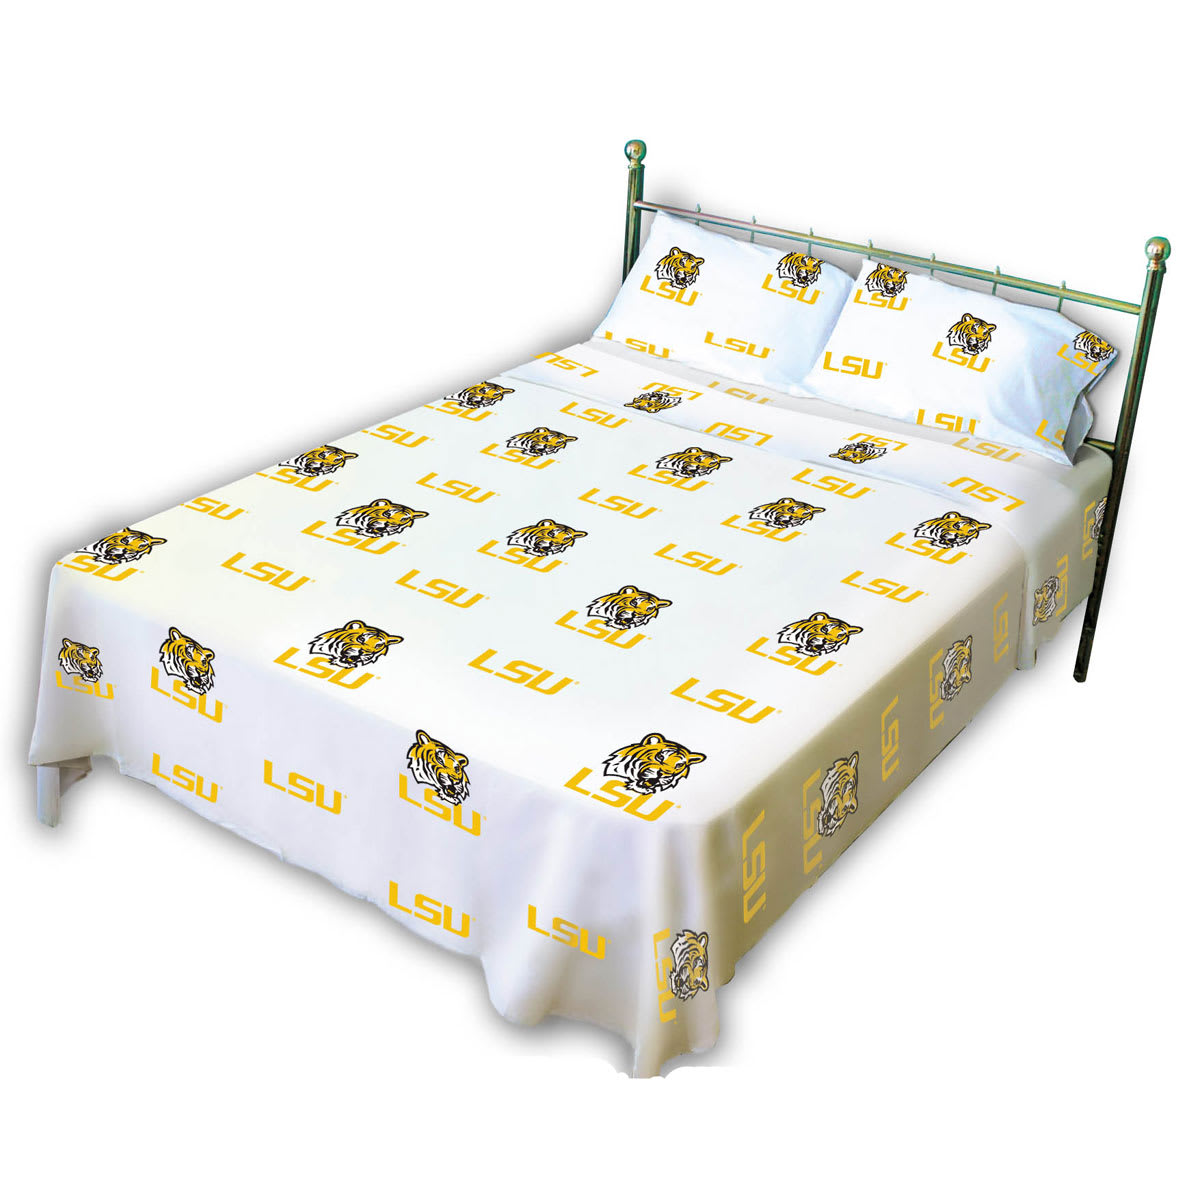 Collegiate LSU Tigers Twin XL Sheet Set - White NCAA Louisiana State Sheets Twin Bed by oBedding.com - Verified Purchase Review Channel